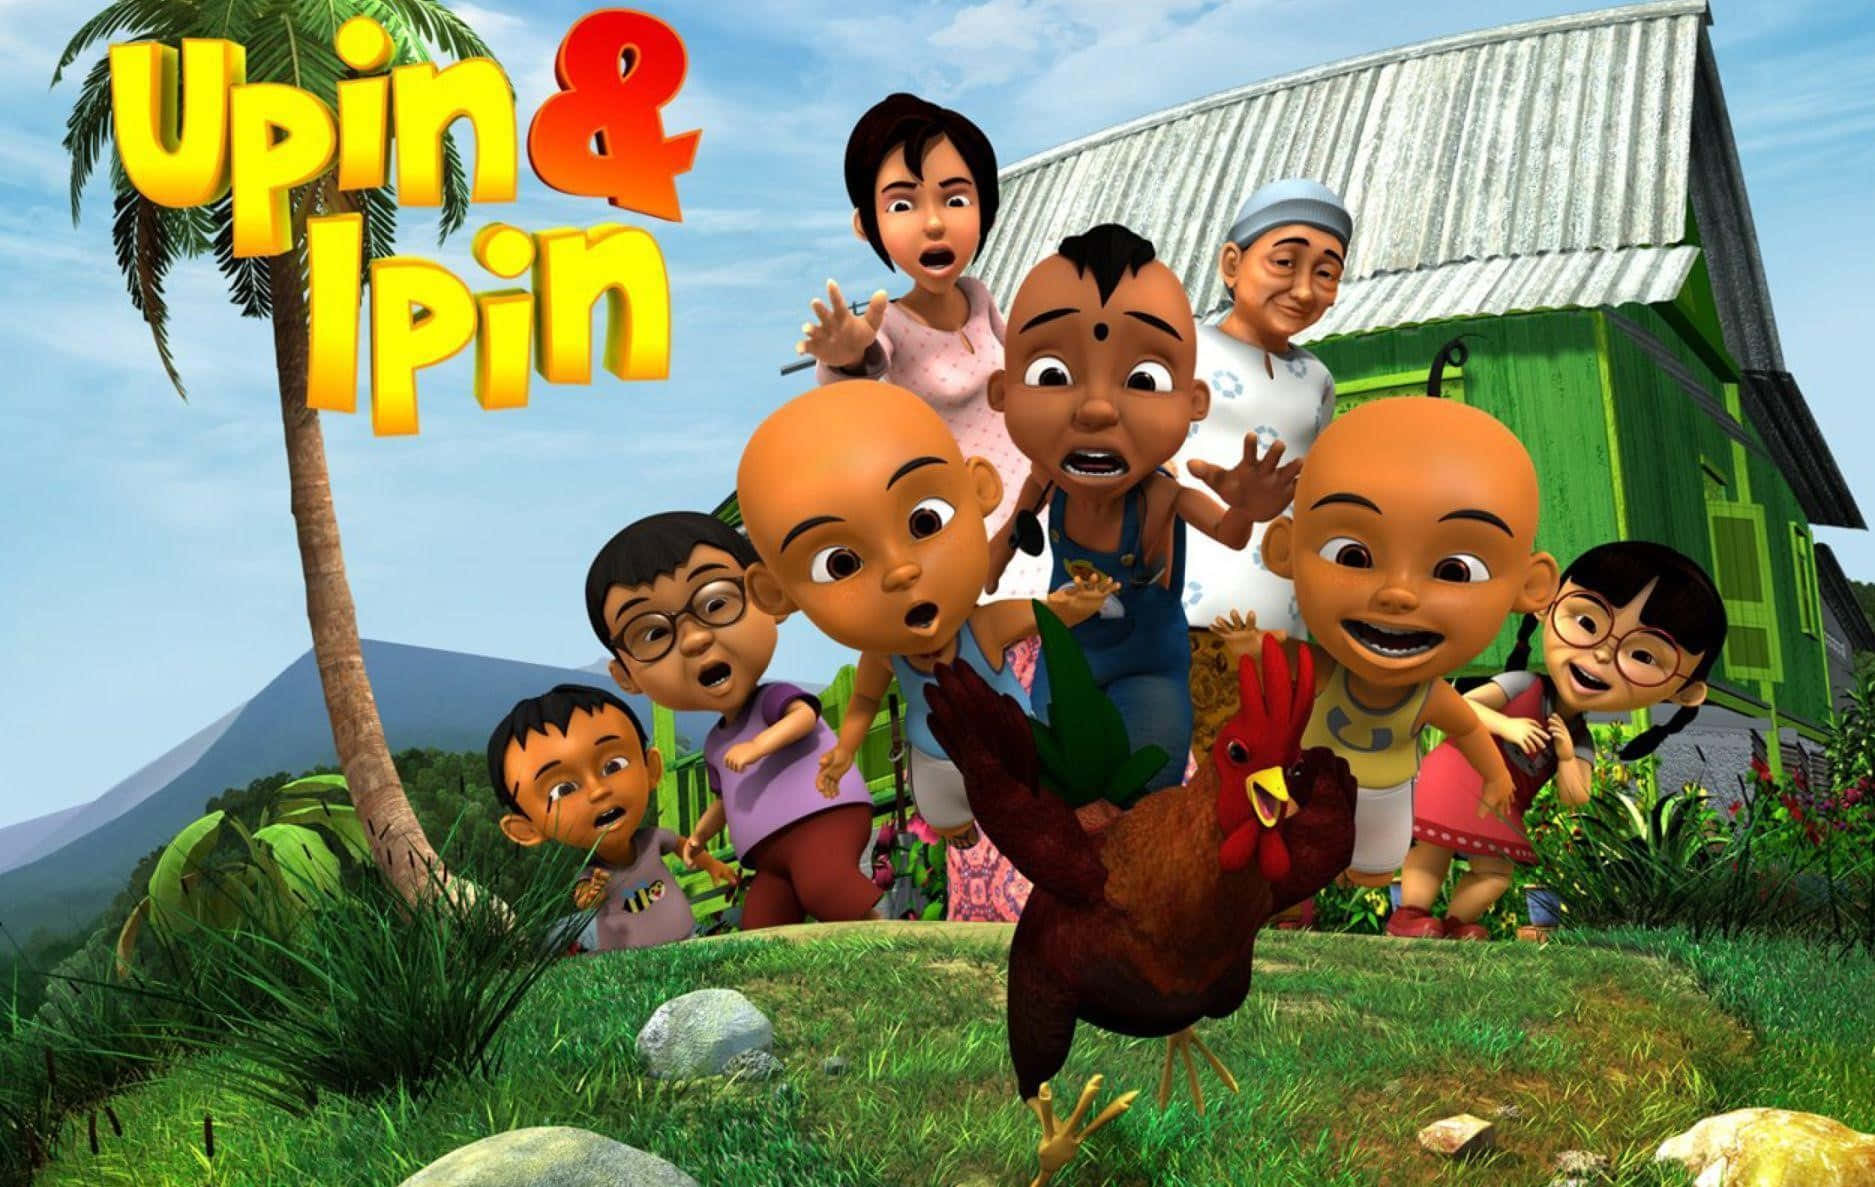 Uppin&Pin - A Cartoon With Children In Front Of A House